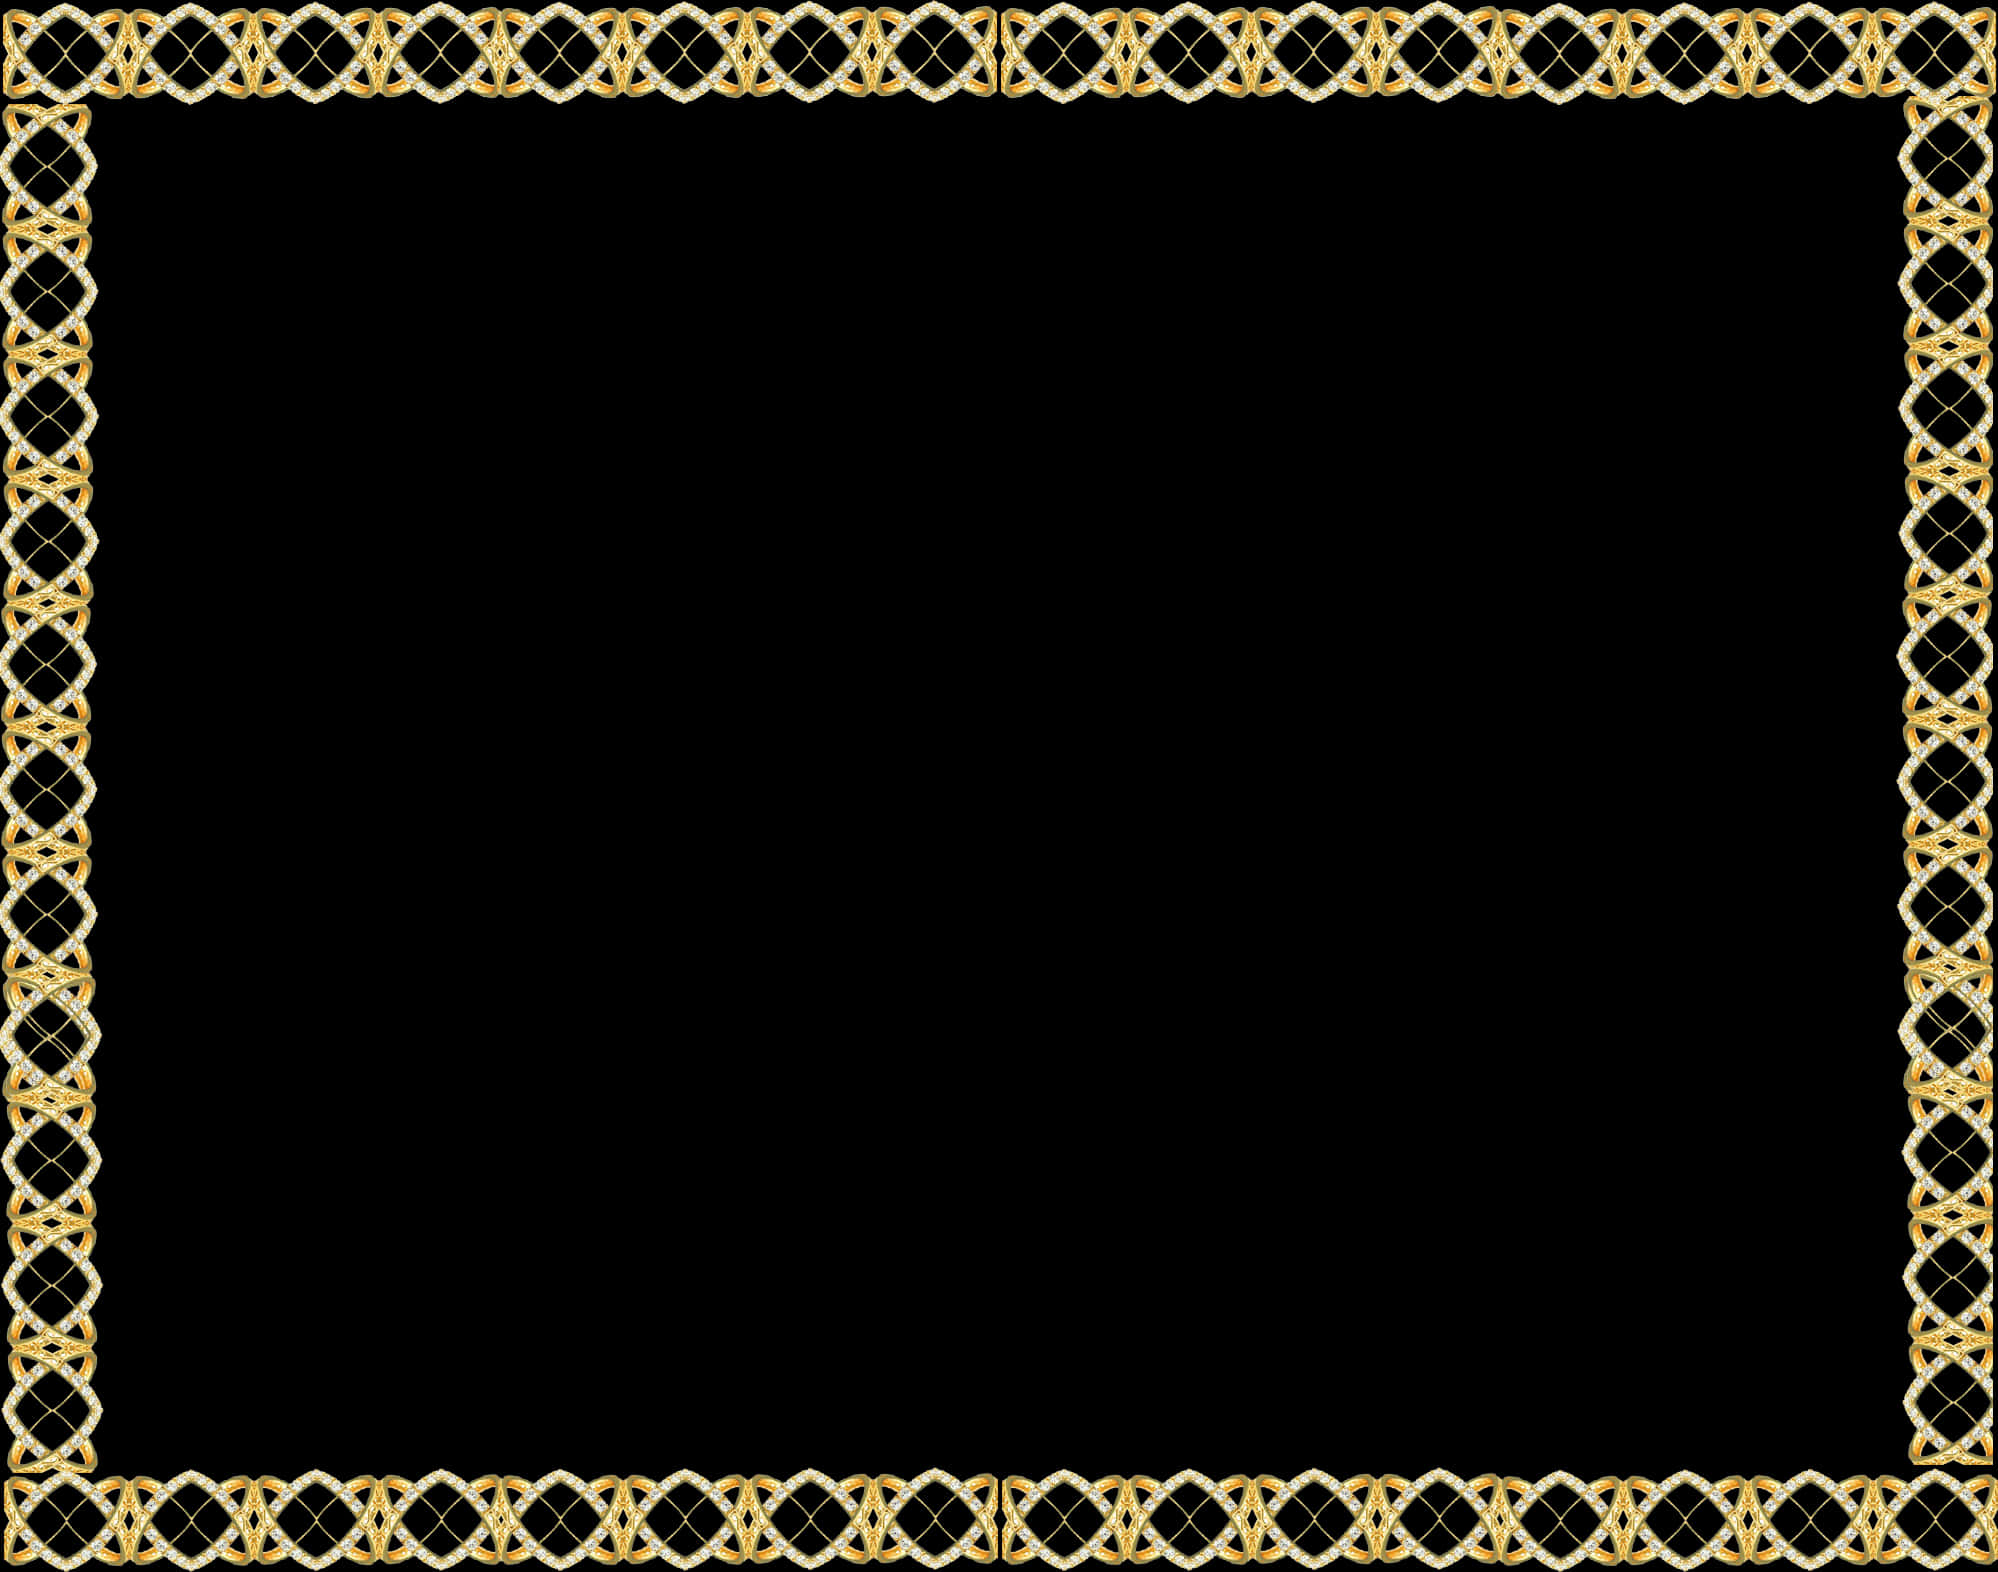 A Black Background With Gold Border